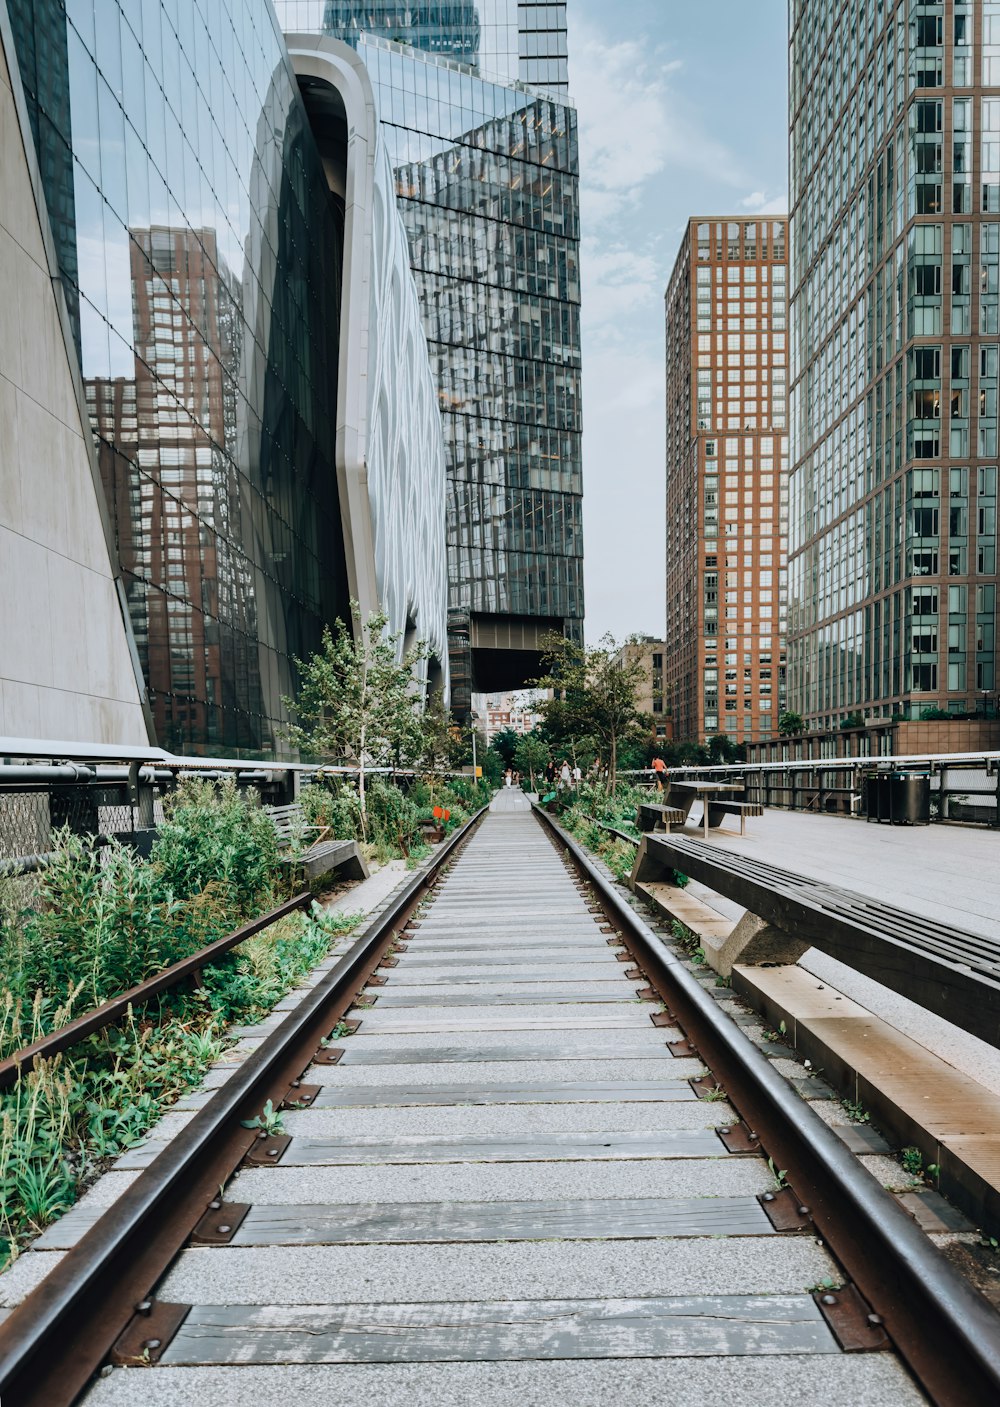 a set of train tracks in front of tall buildings